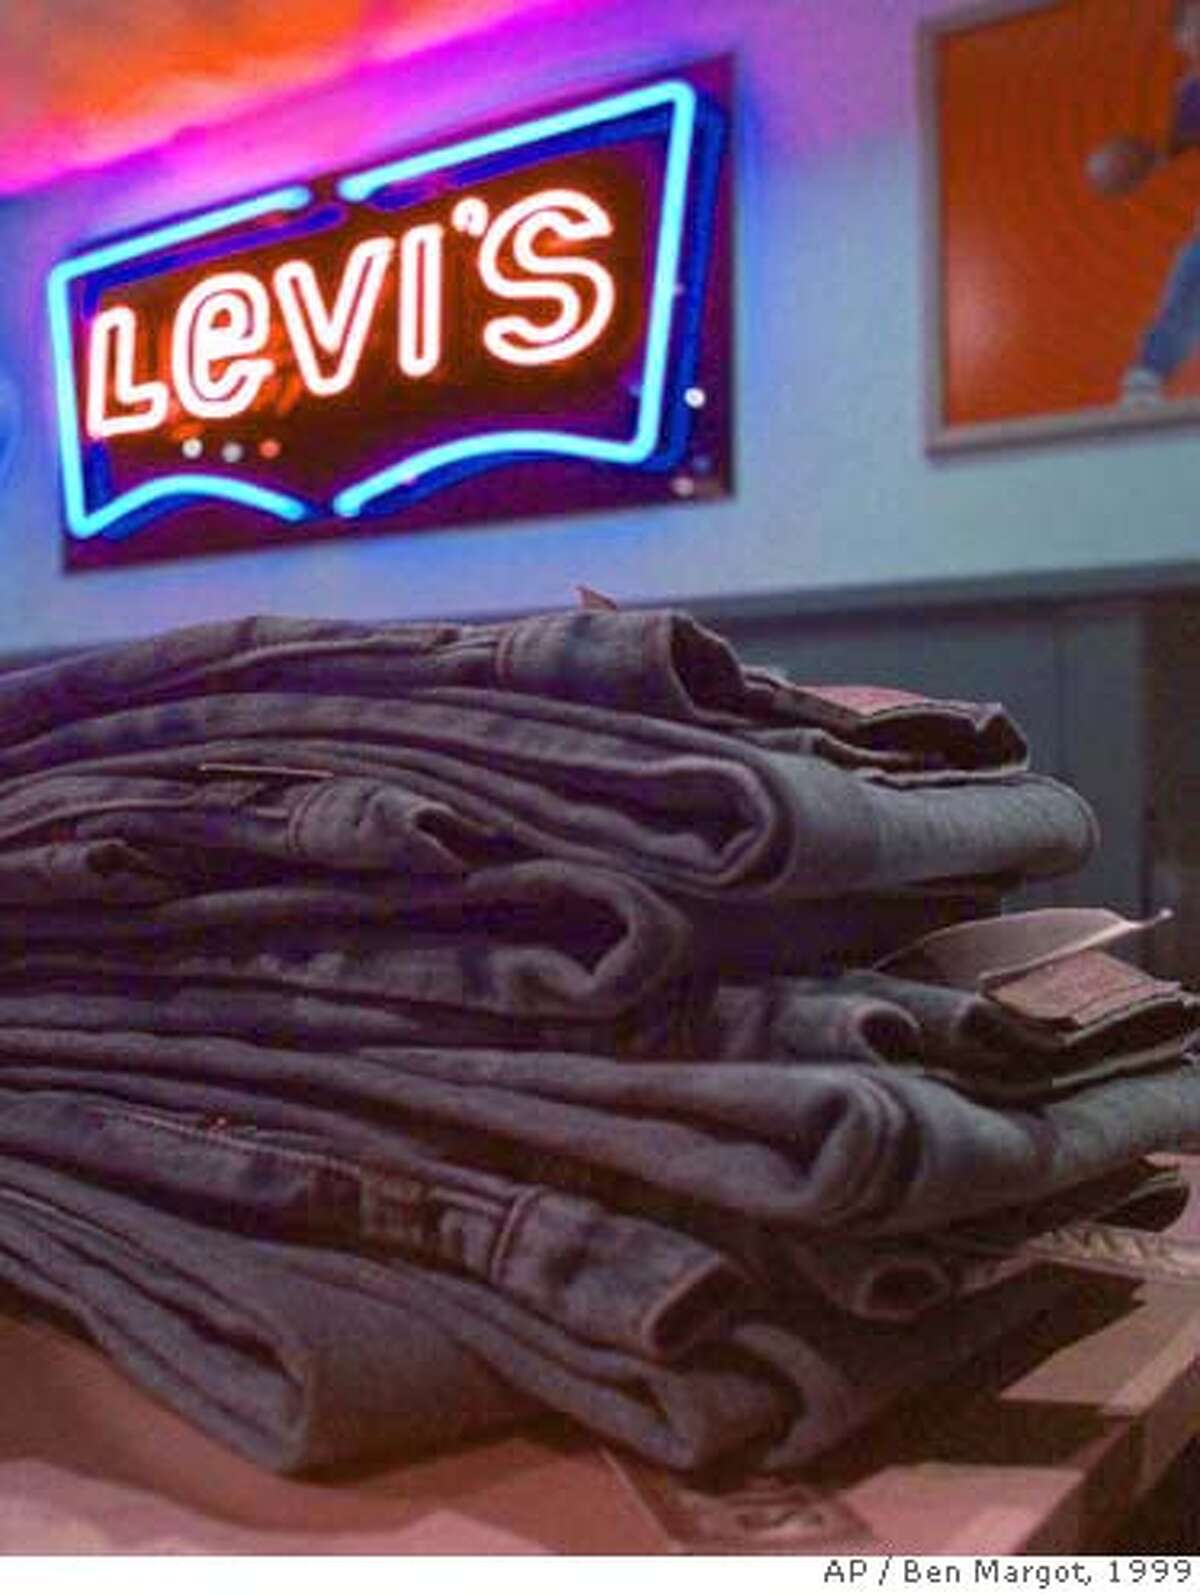 Shrinking to fit / Departing CEO oversaw layoffs, rebound at Levi's